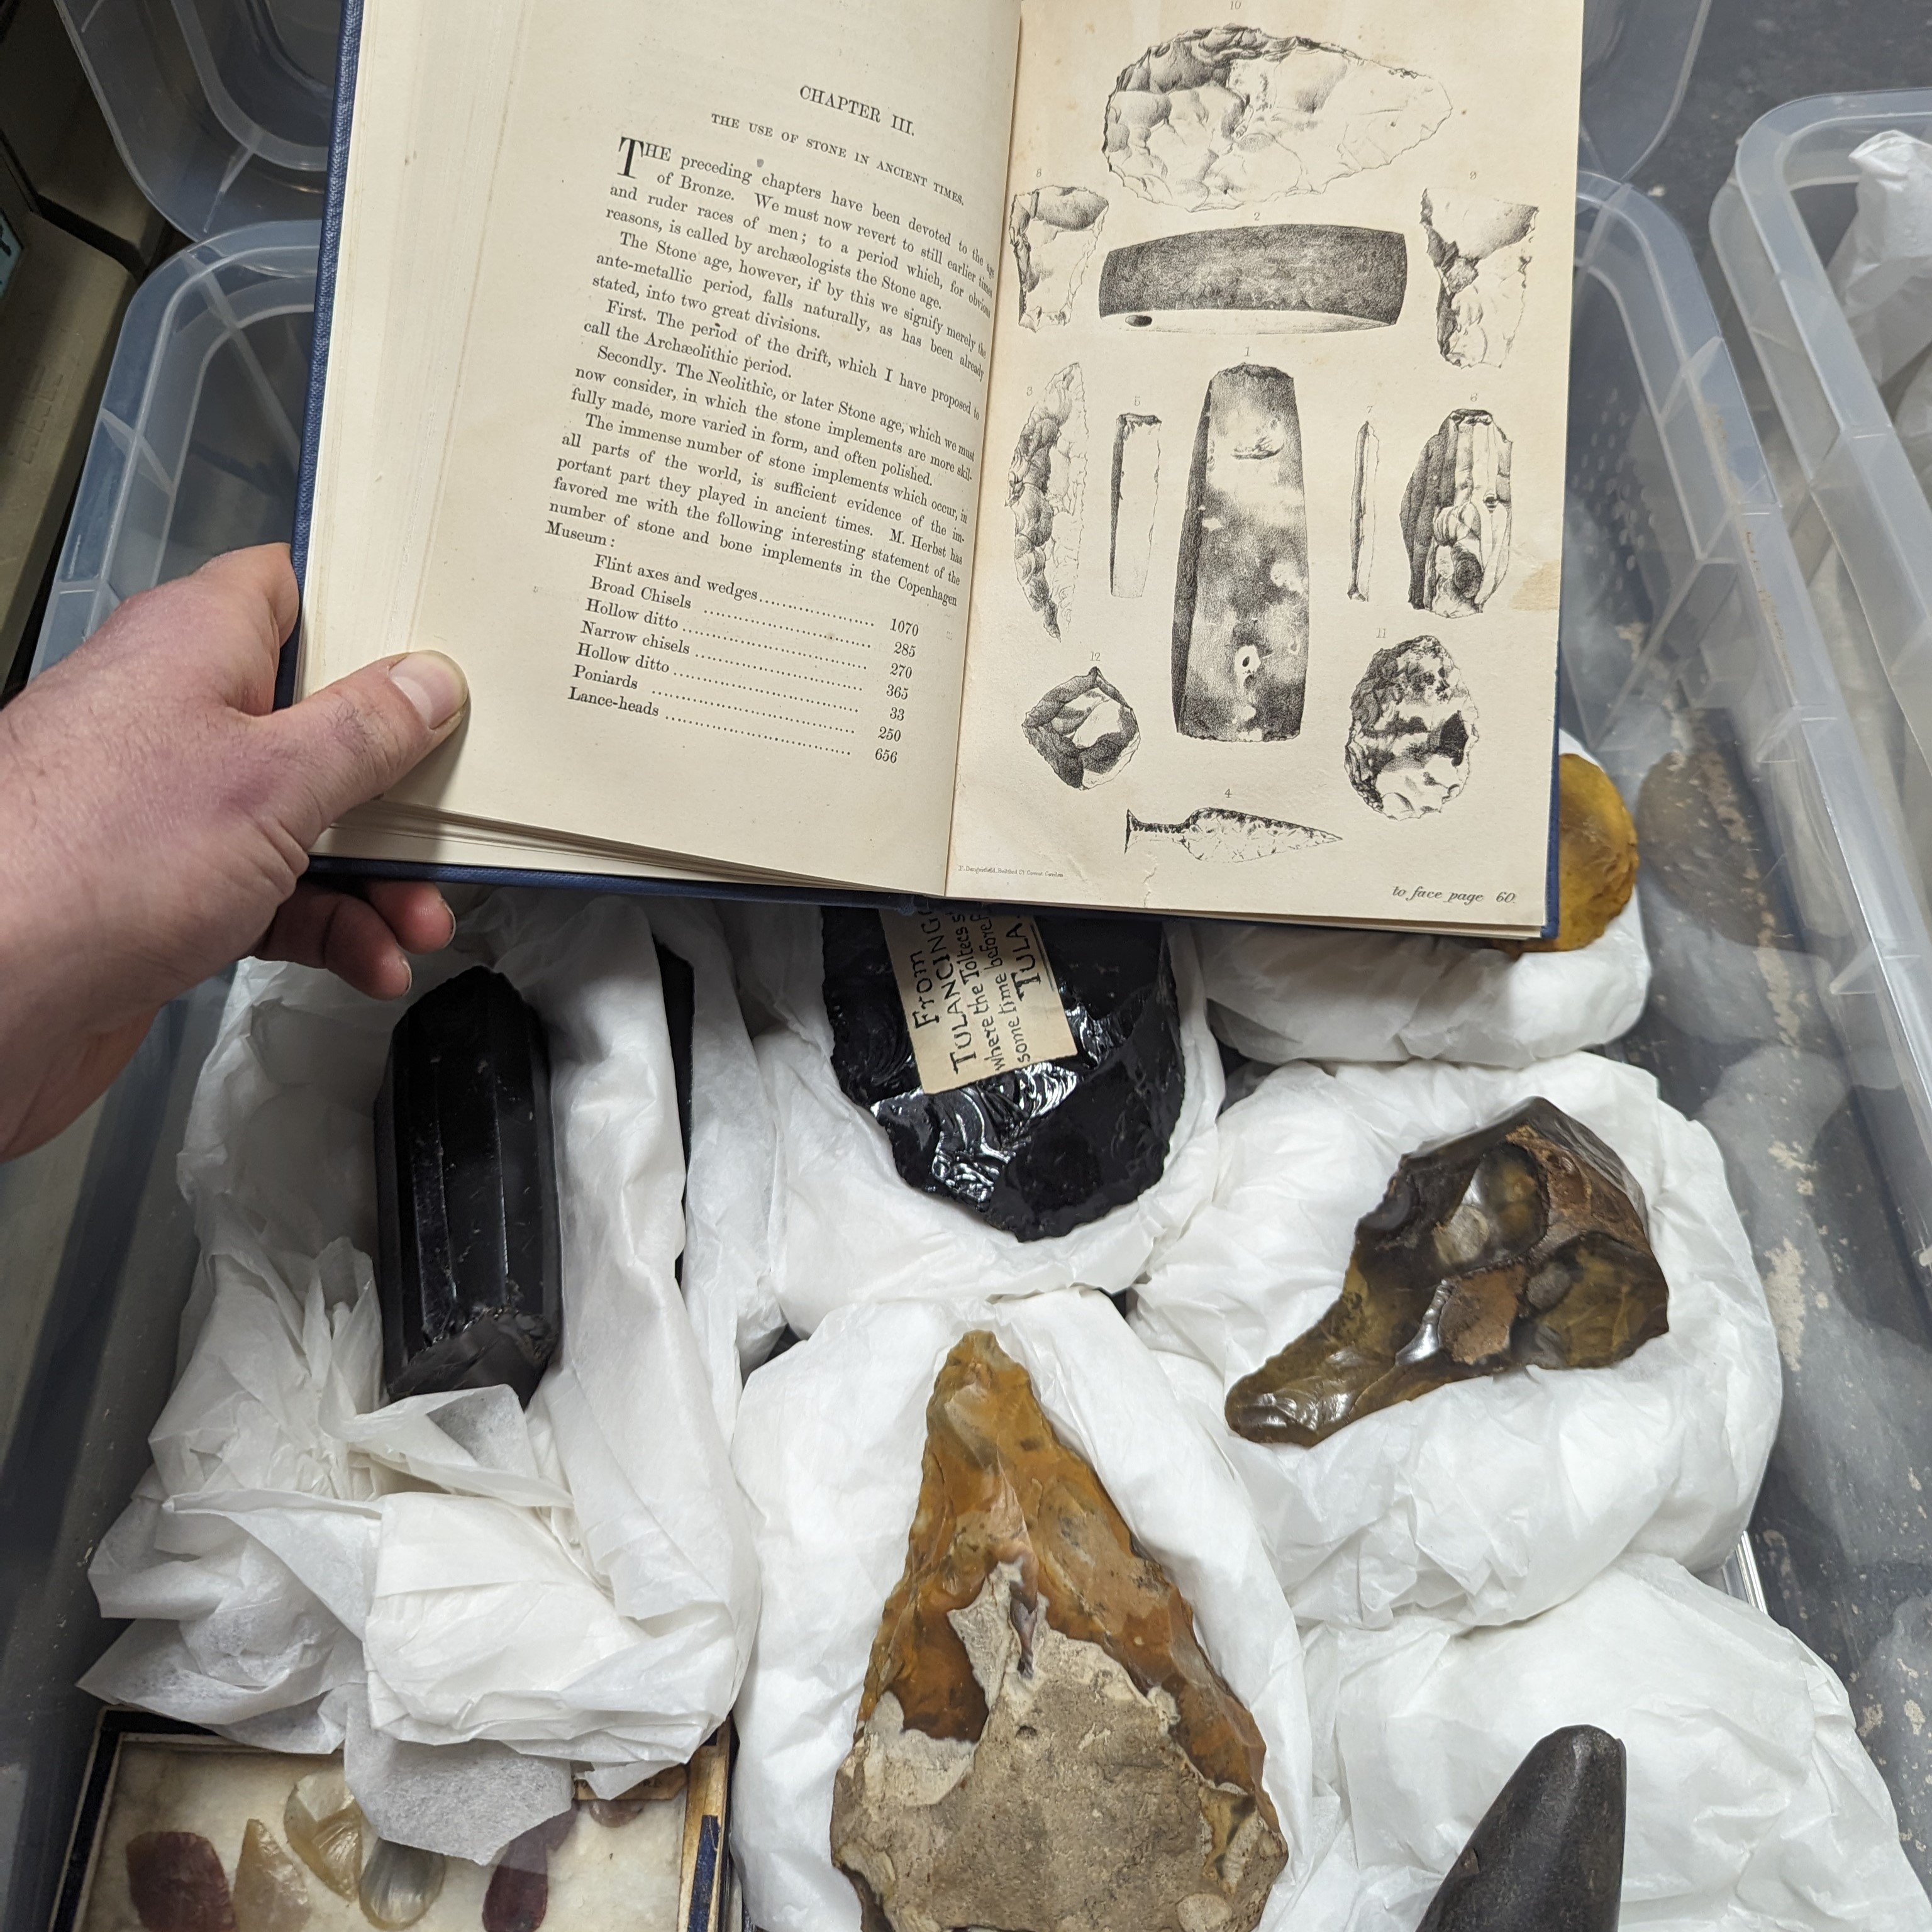 Lubbock's book 'Prehistoric Times' held with some prehistoric stone tools ready for an exhibition